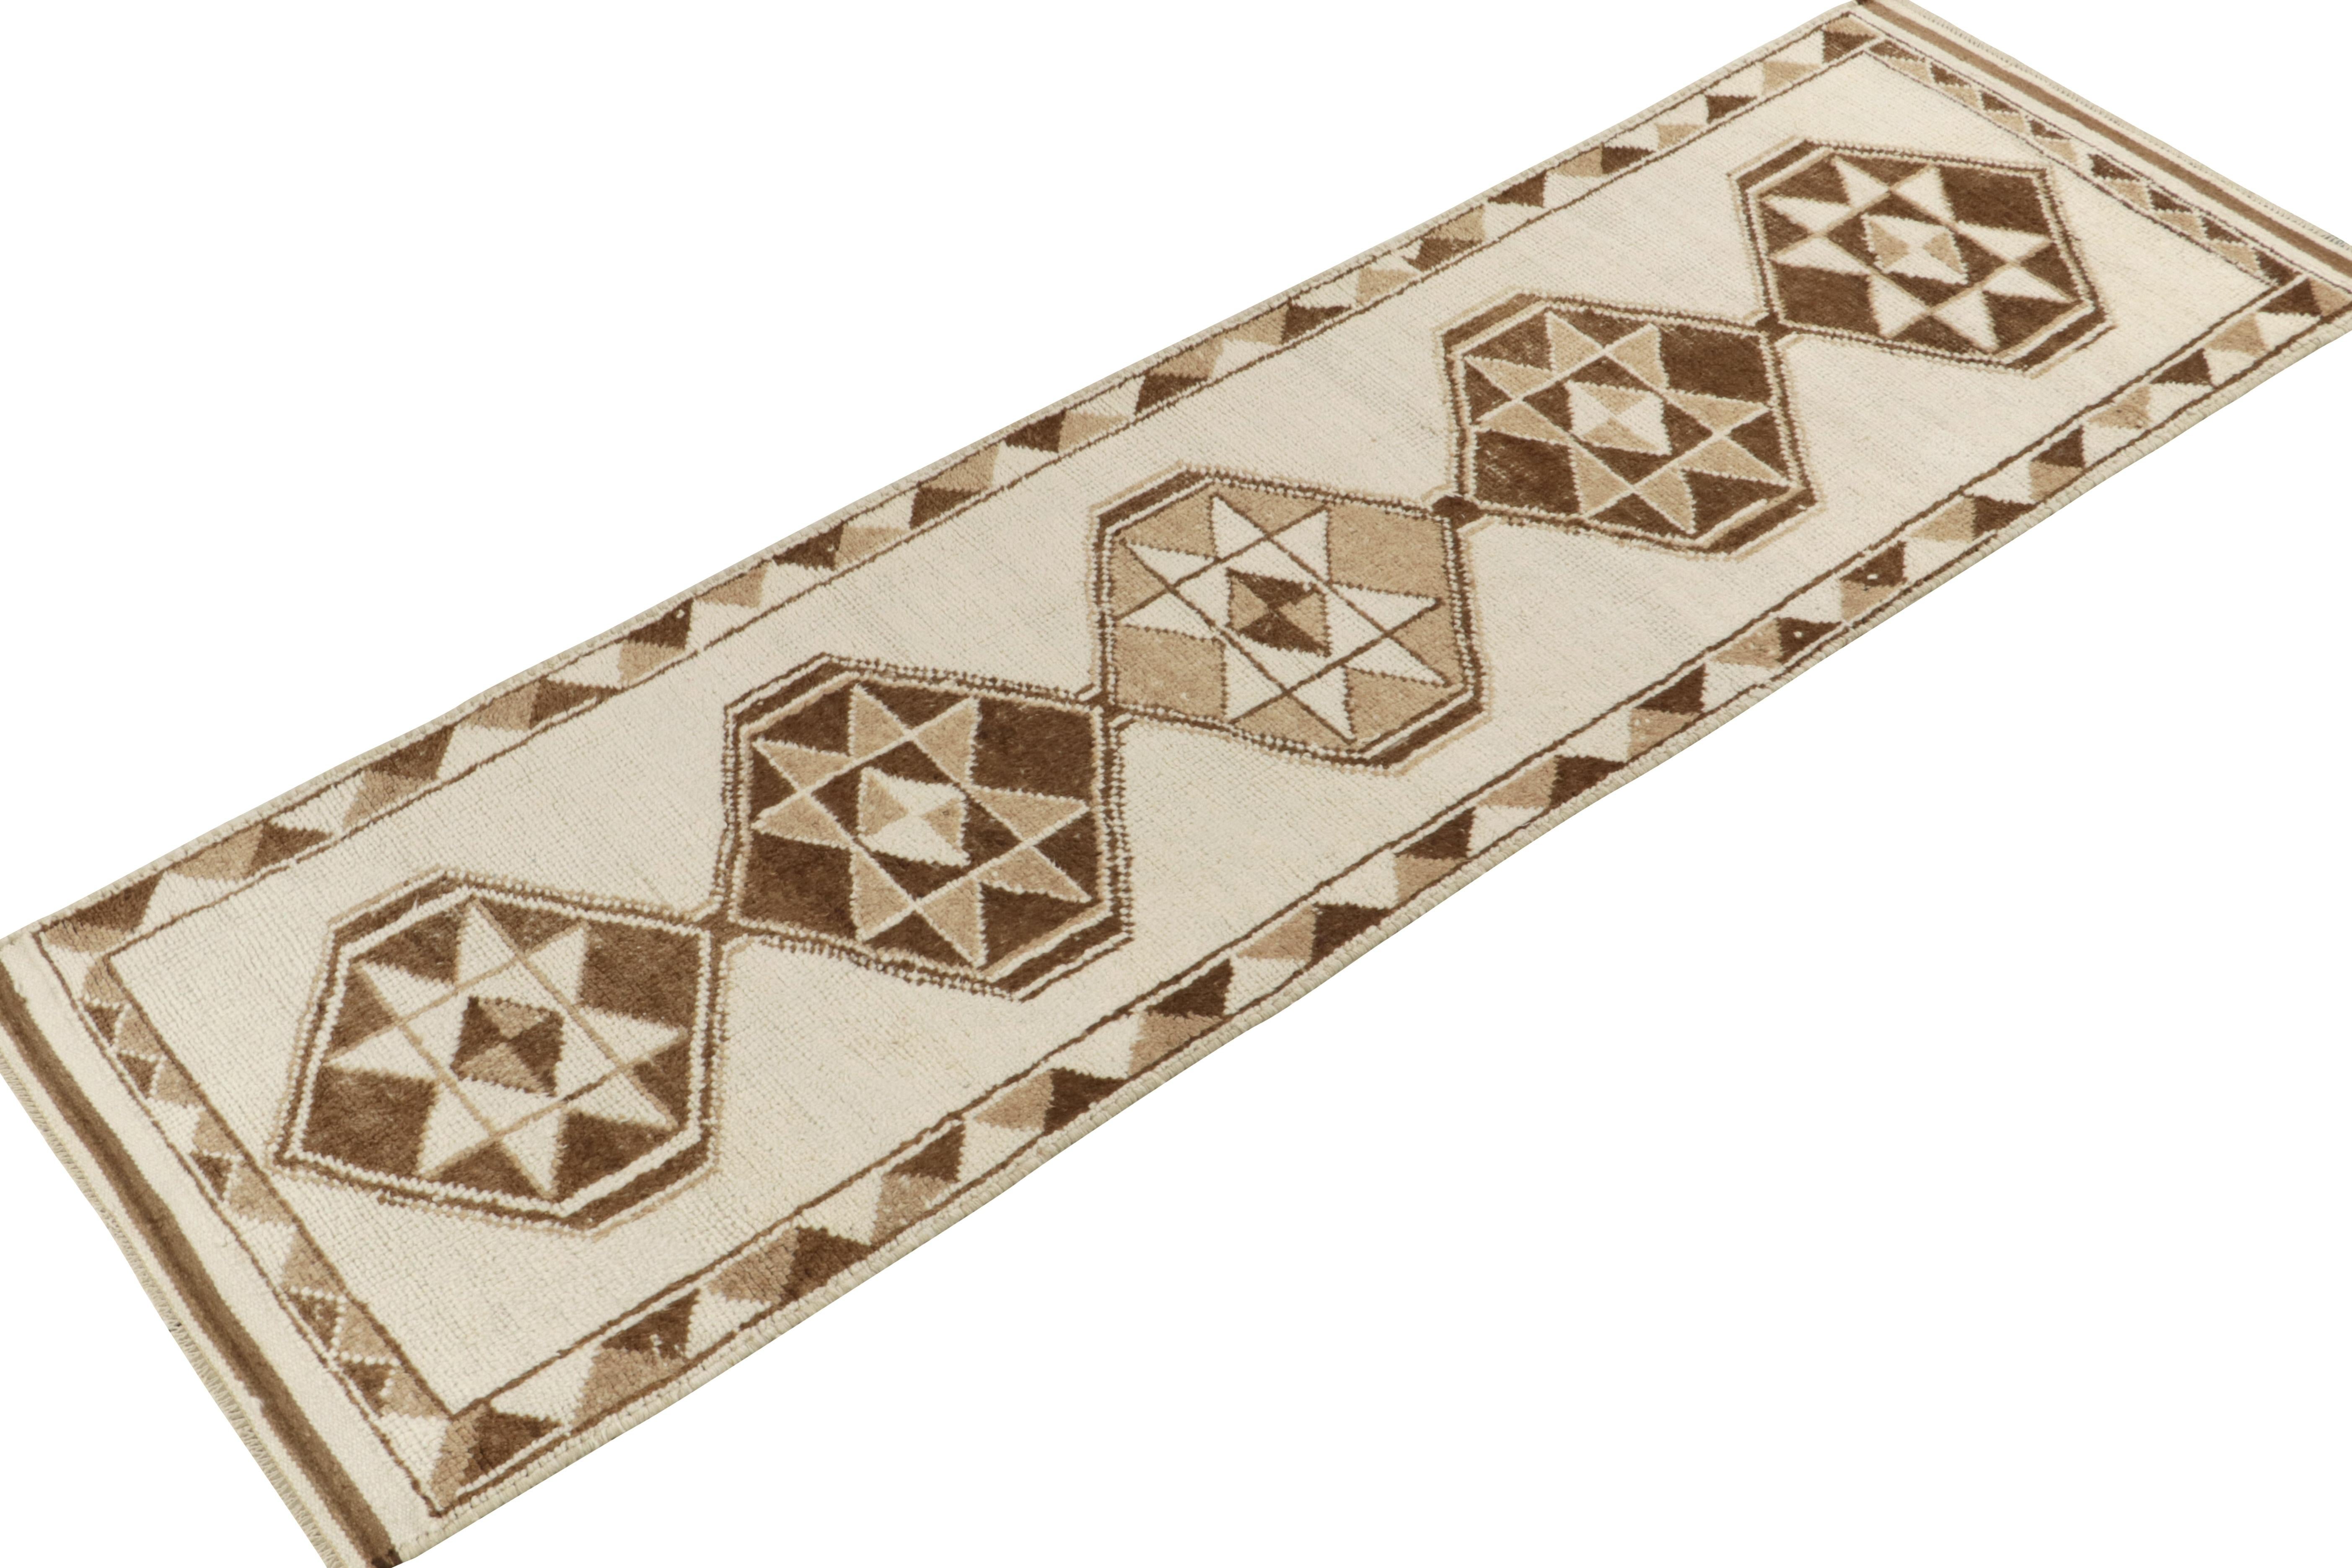 From Rug & Kilim’s vintage selections, a 3x11 hand-knotted wool runner from Turkey bearing striking nomadic influences. 

The 1950s tribal piece showcases traditional motifs on the field in bright white & beige brown tones casting a gorgeous